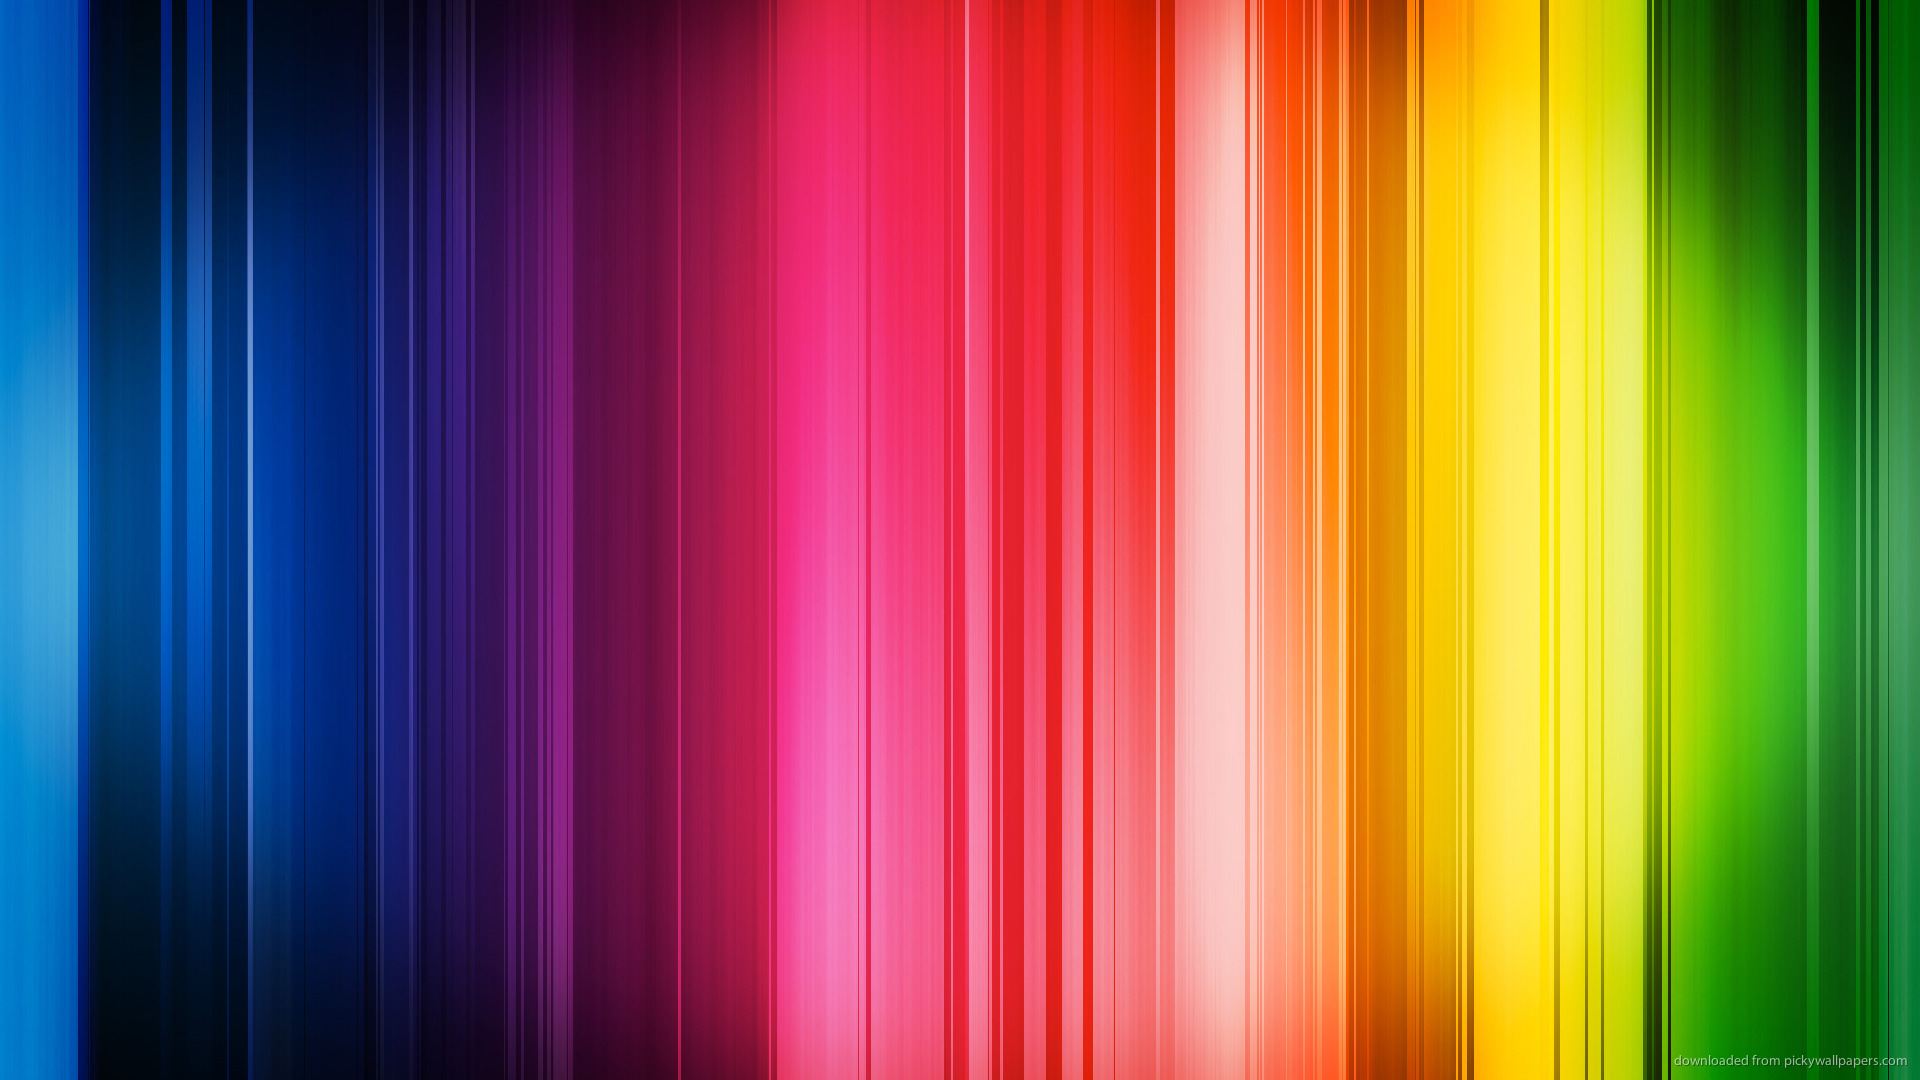 twitter stripes backgrounds 1920x1080 not working copy paste wallpaper